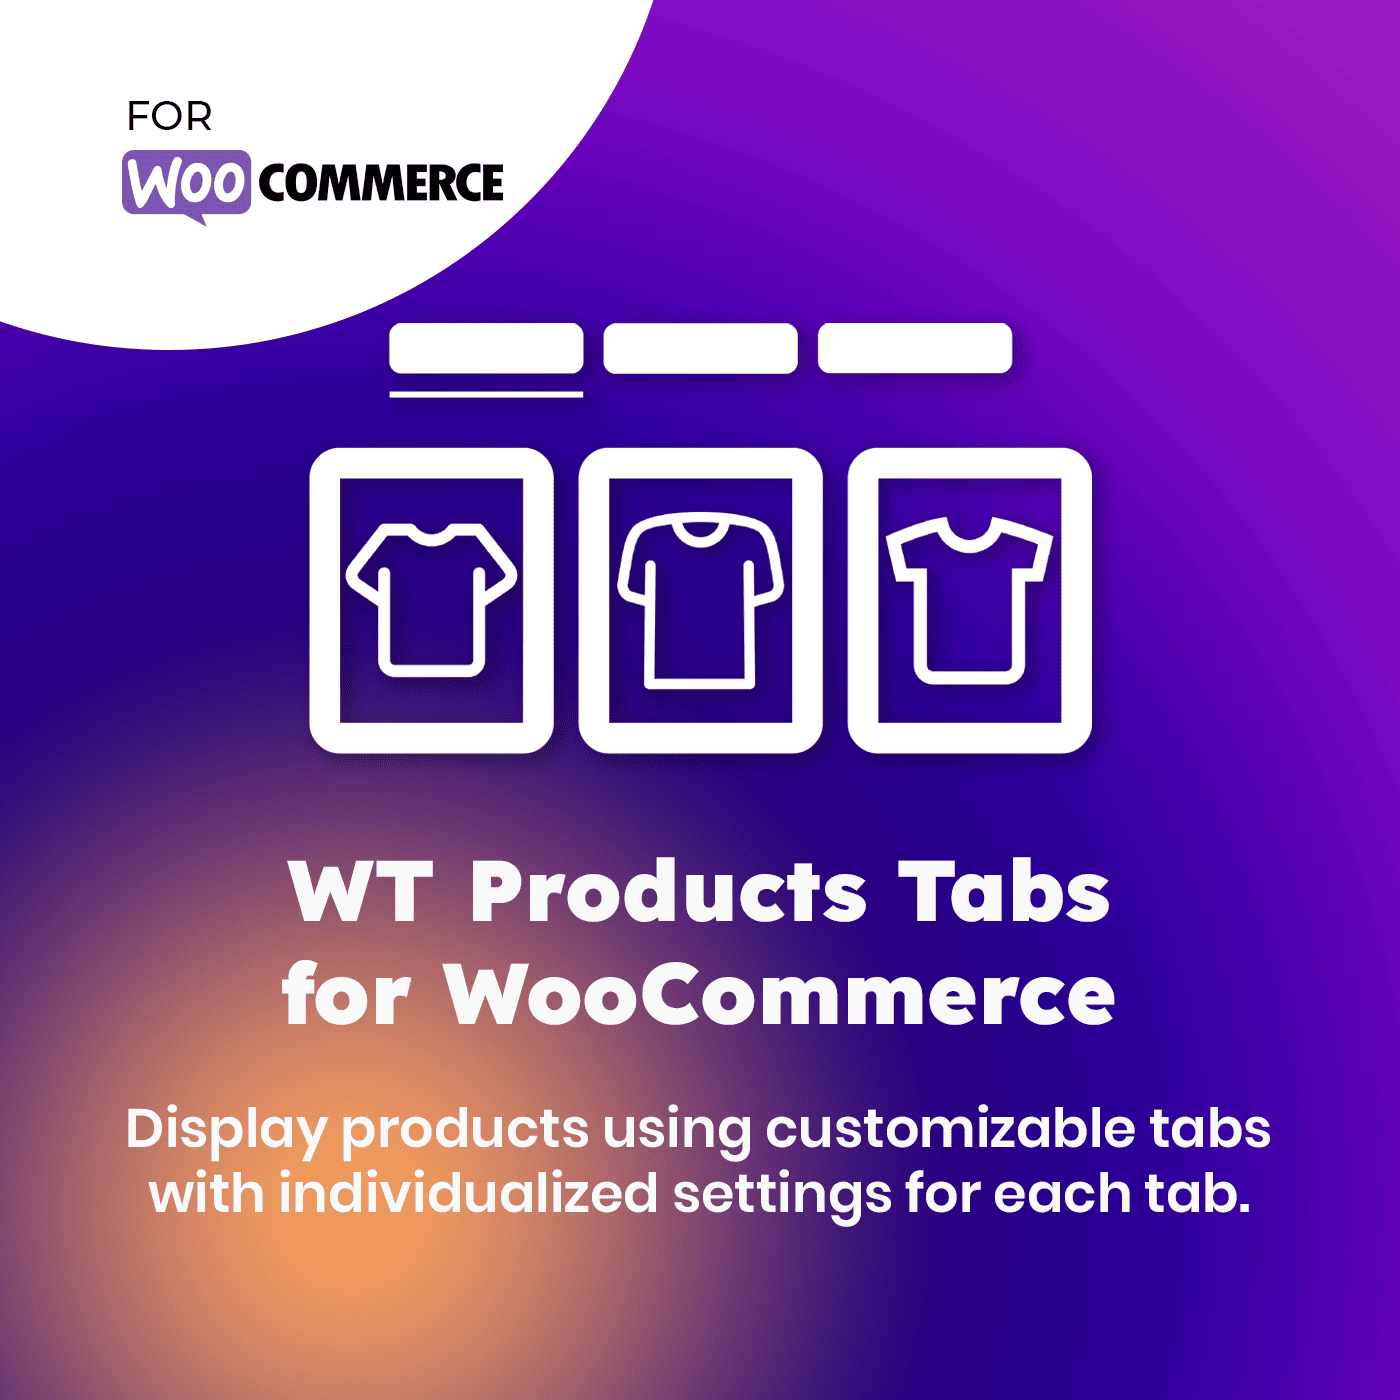 WT Products Tabs for WooCommerce - WordPress Plugin for WooCommerce